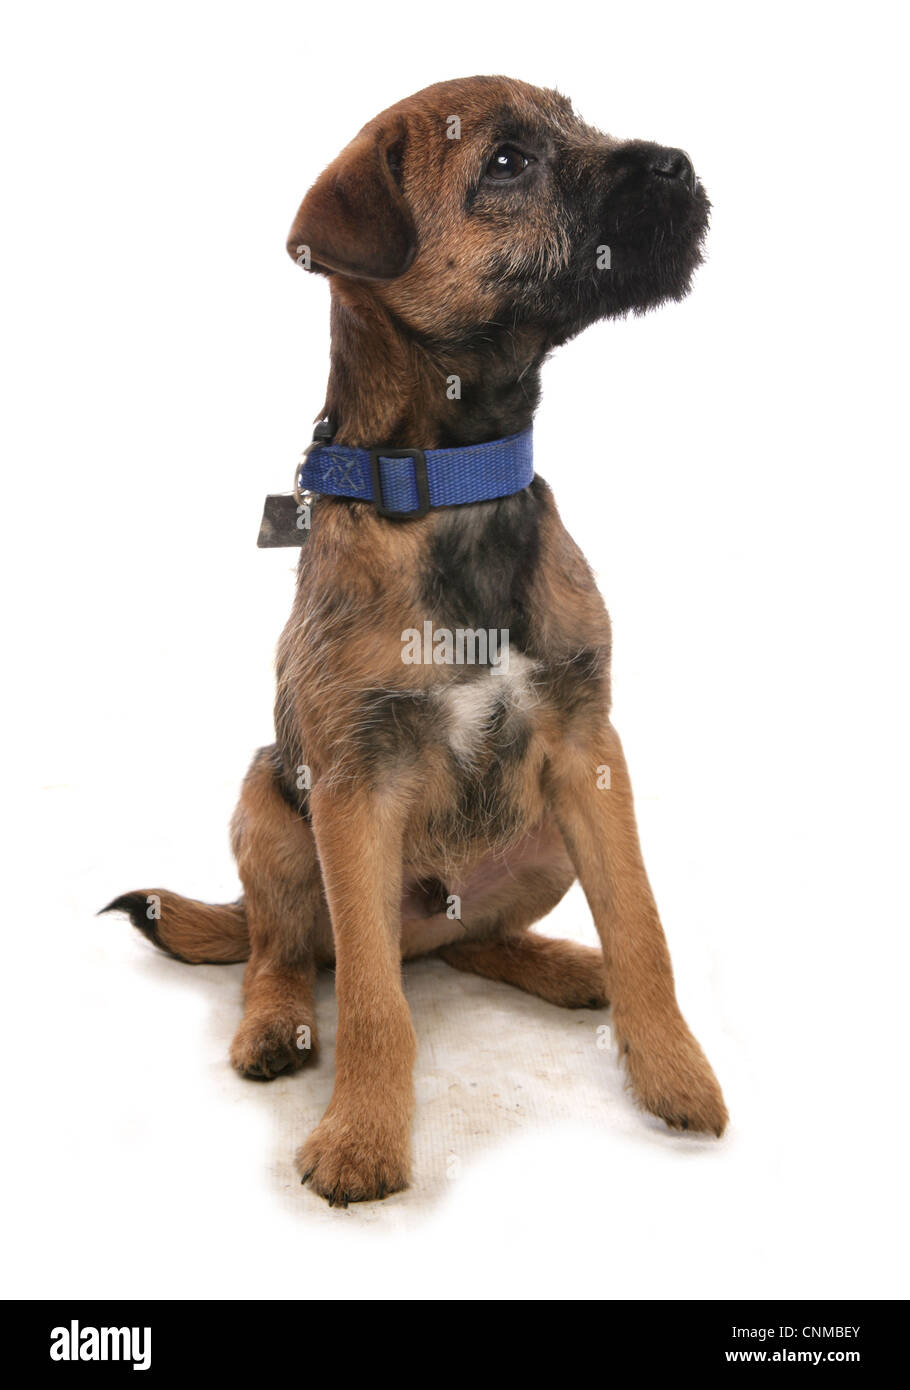 Domestic Dog, Border Terrier, puppy, with collar and tag, sitting Stock Photo